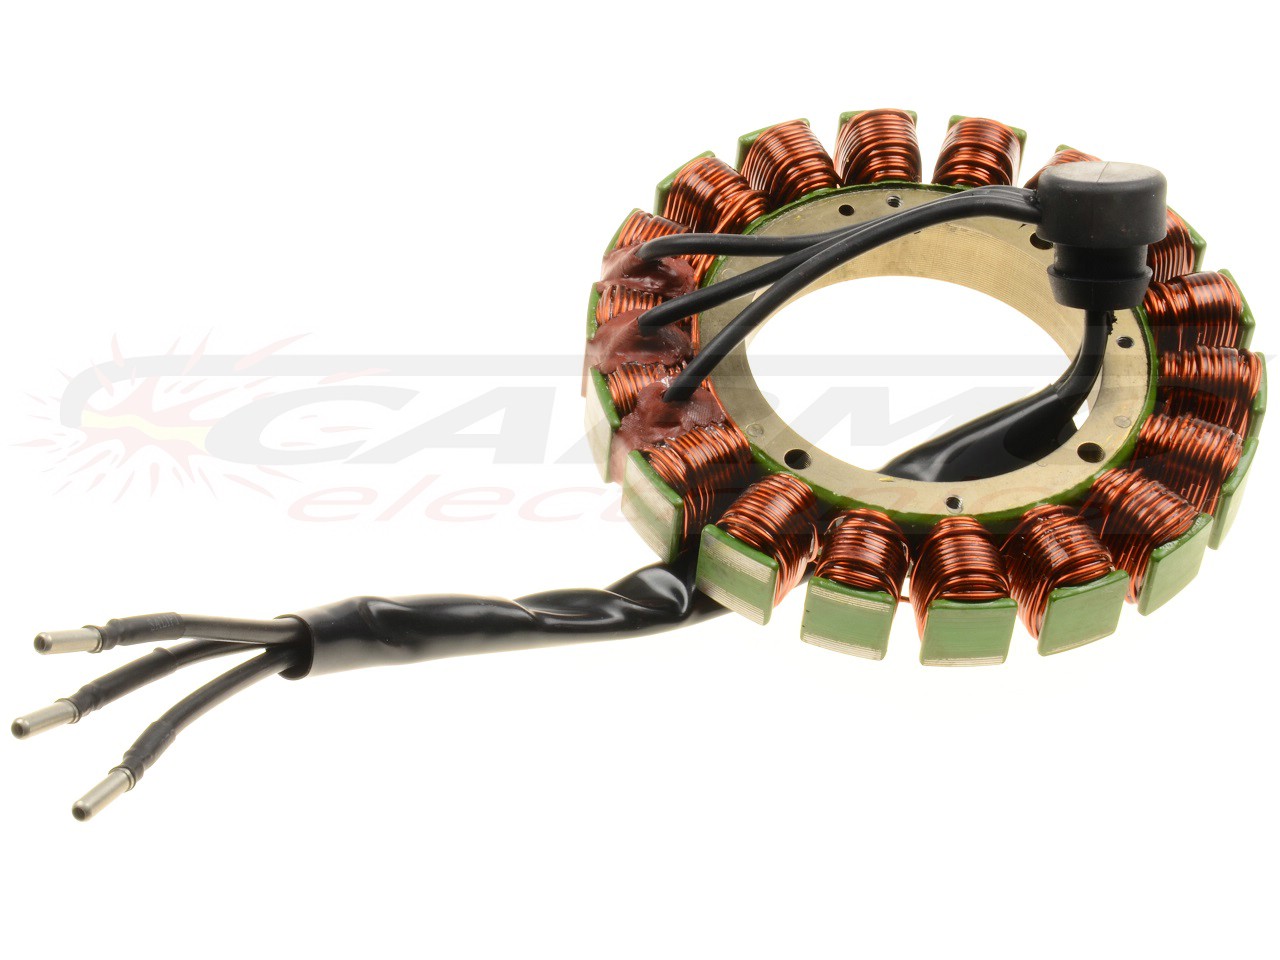 Stator CARG-Buell Buell XB9 Buell XB12 Firebolt Lightning [CARG-Buell-XB9- XB12 stator] £112.00 Carmo Electronics, The place for parts or  electronics for your Motorbike Quad Scooter Car or Jetski